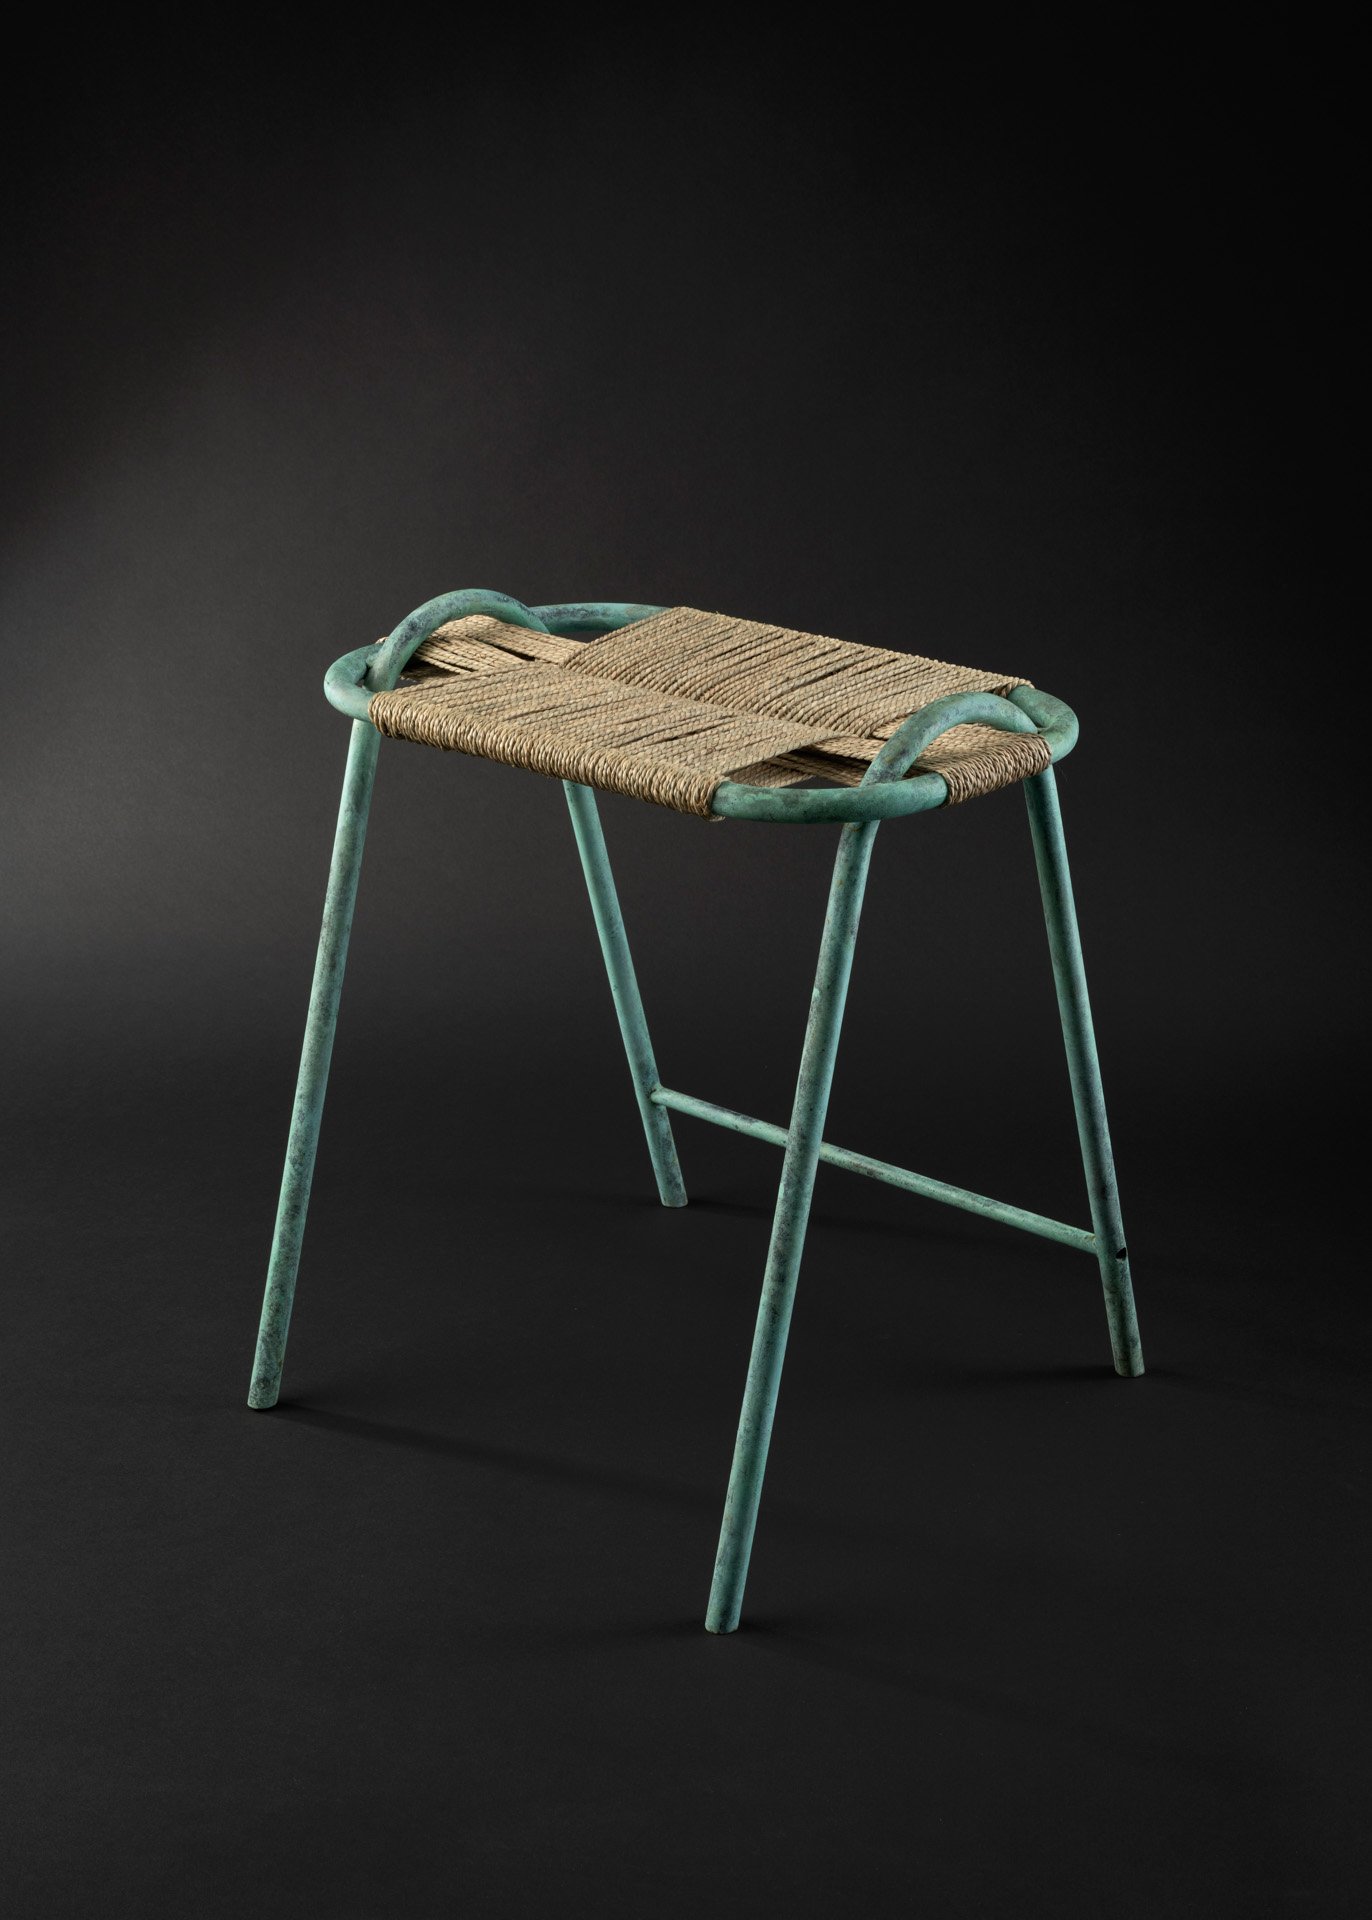 Collide Stool, collaboration with Duncan Young, 2022. Photo Michael Haines